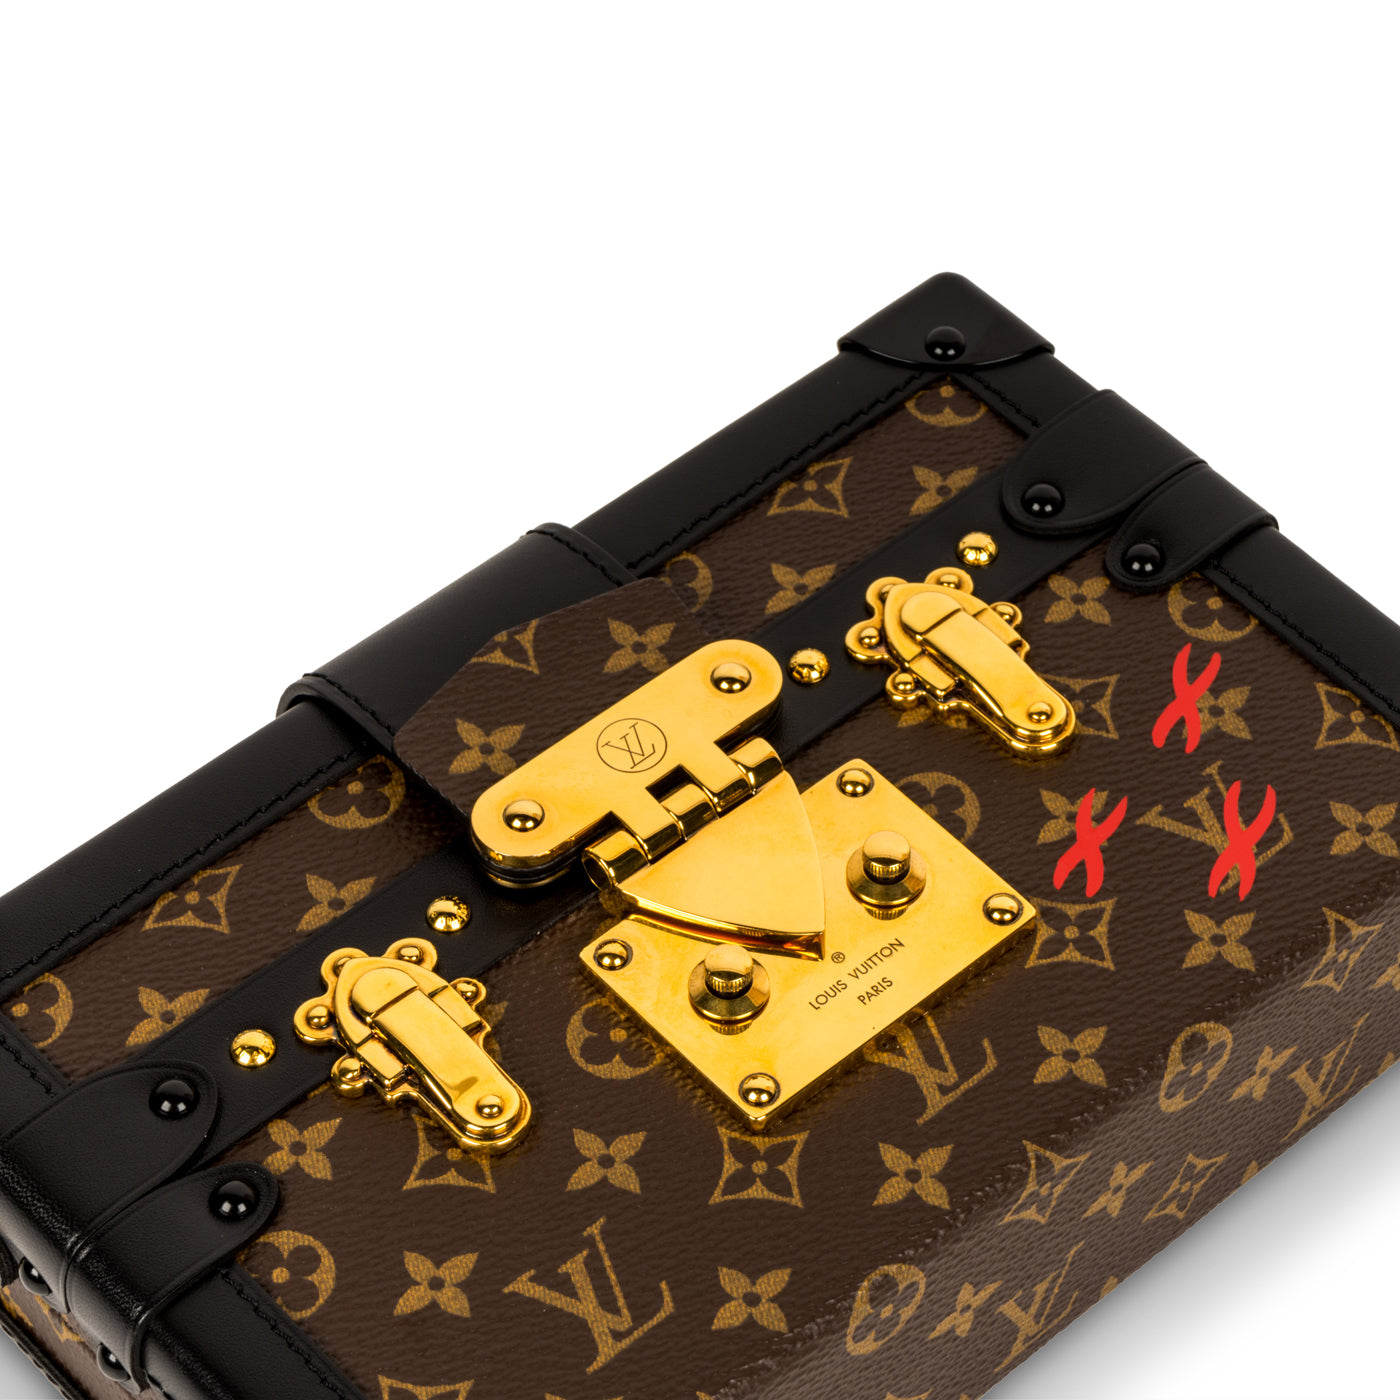 Louis Vuitton Petite Malle First Impressions and Try On 